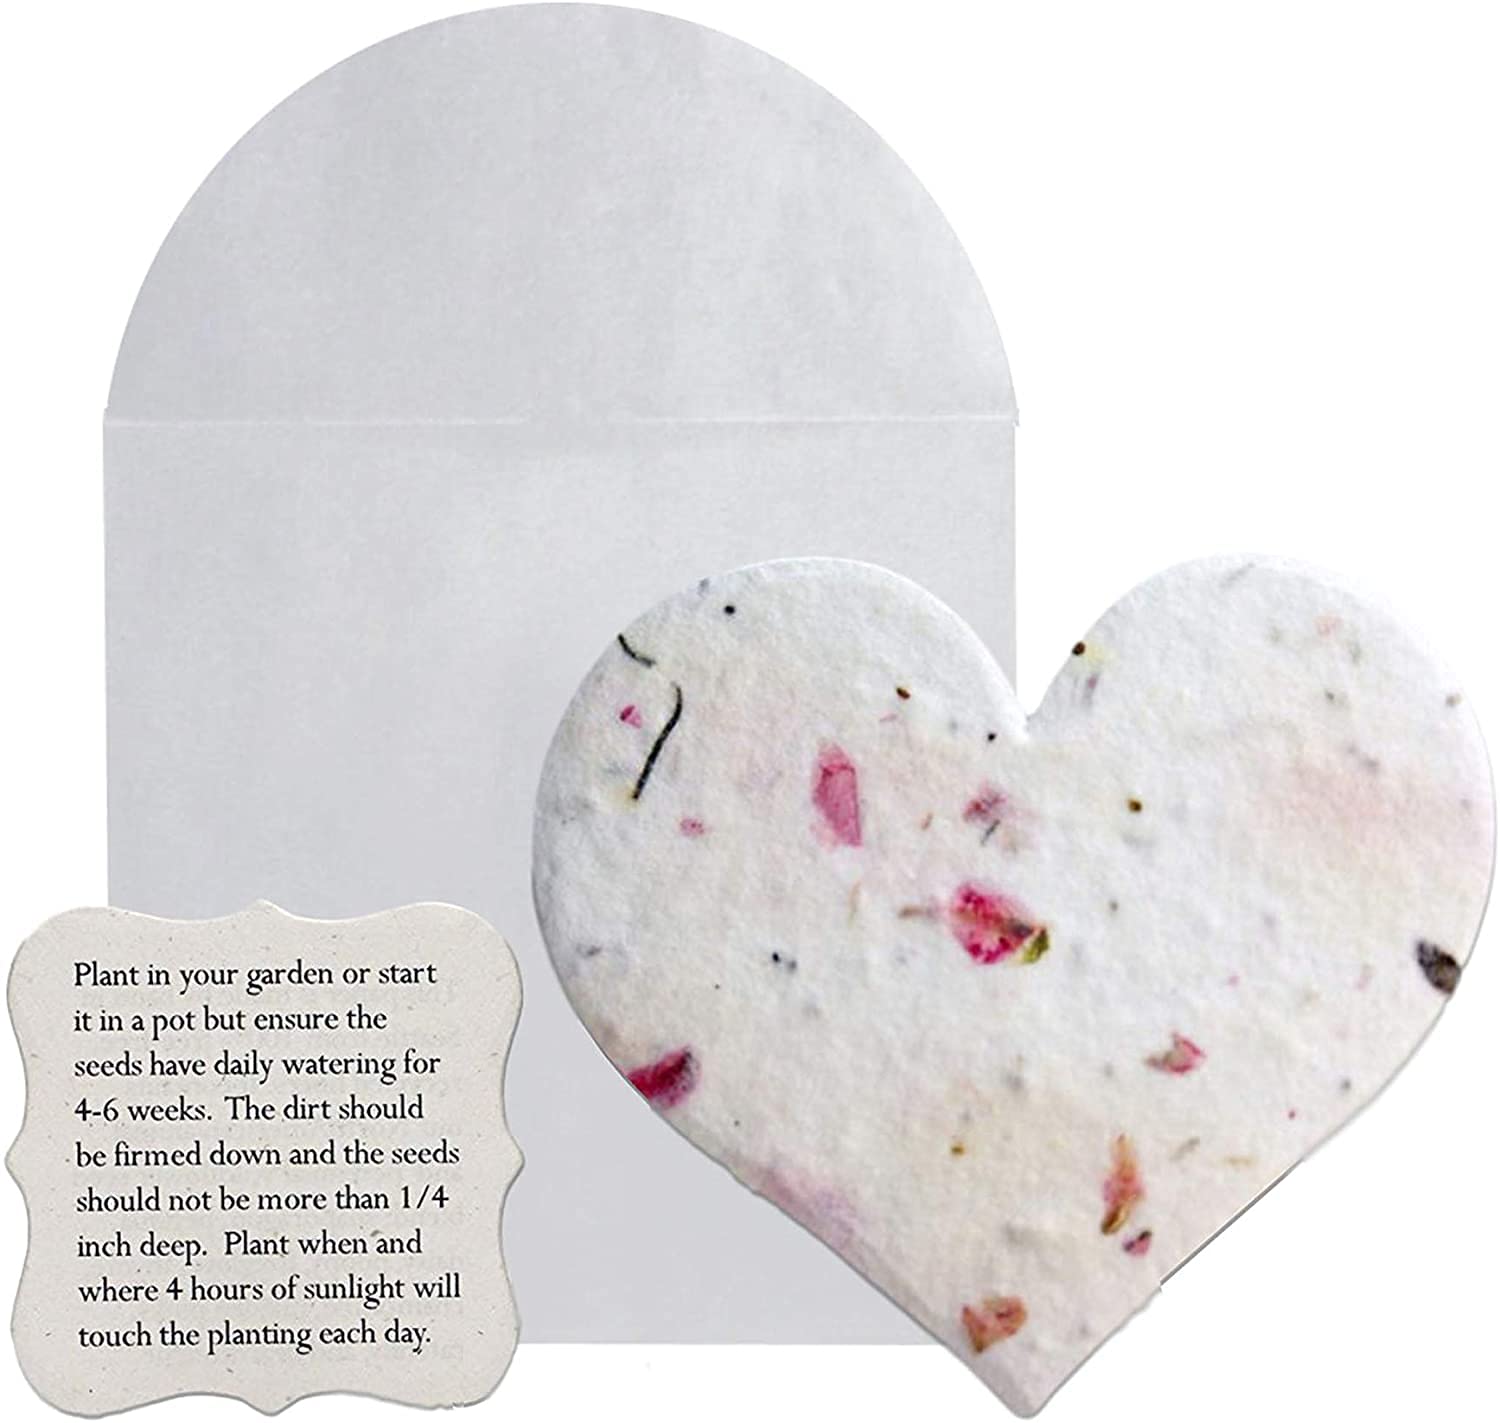 Where To Find Plantable Seed Paper For Invitations In Australia